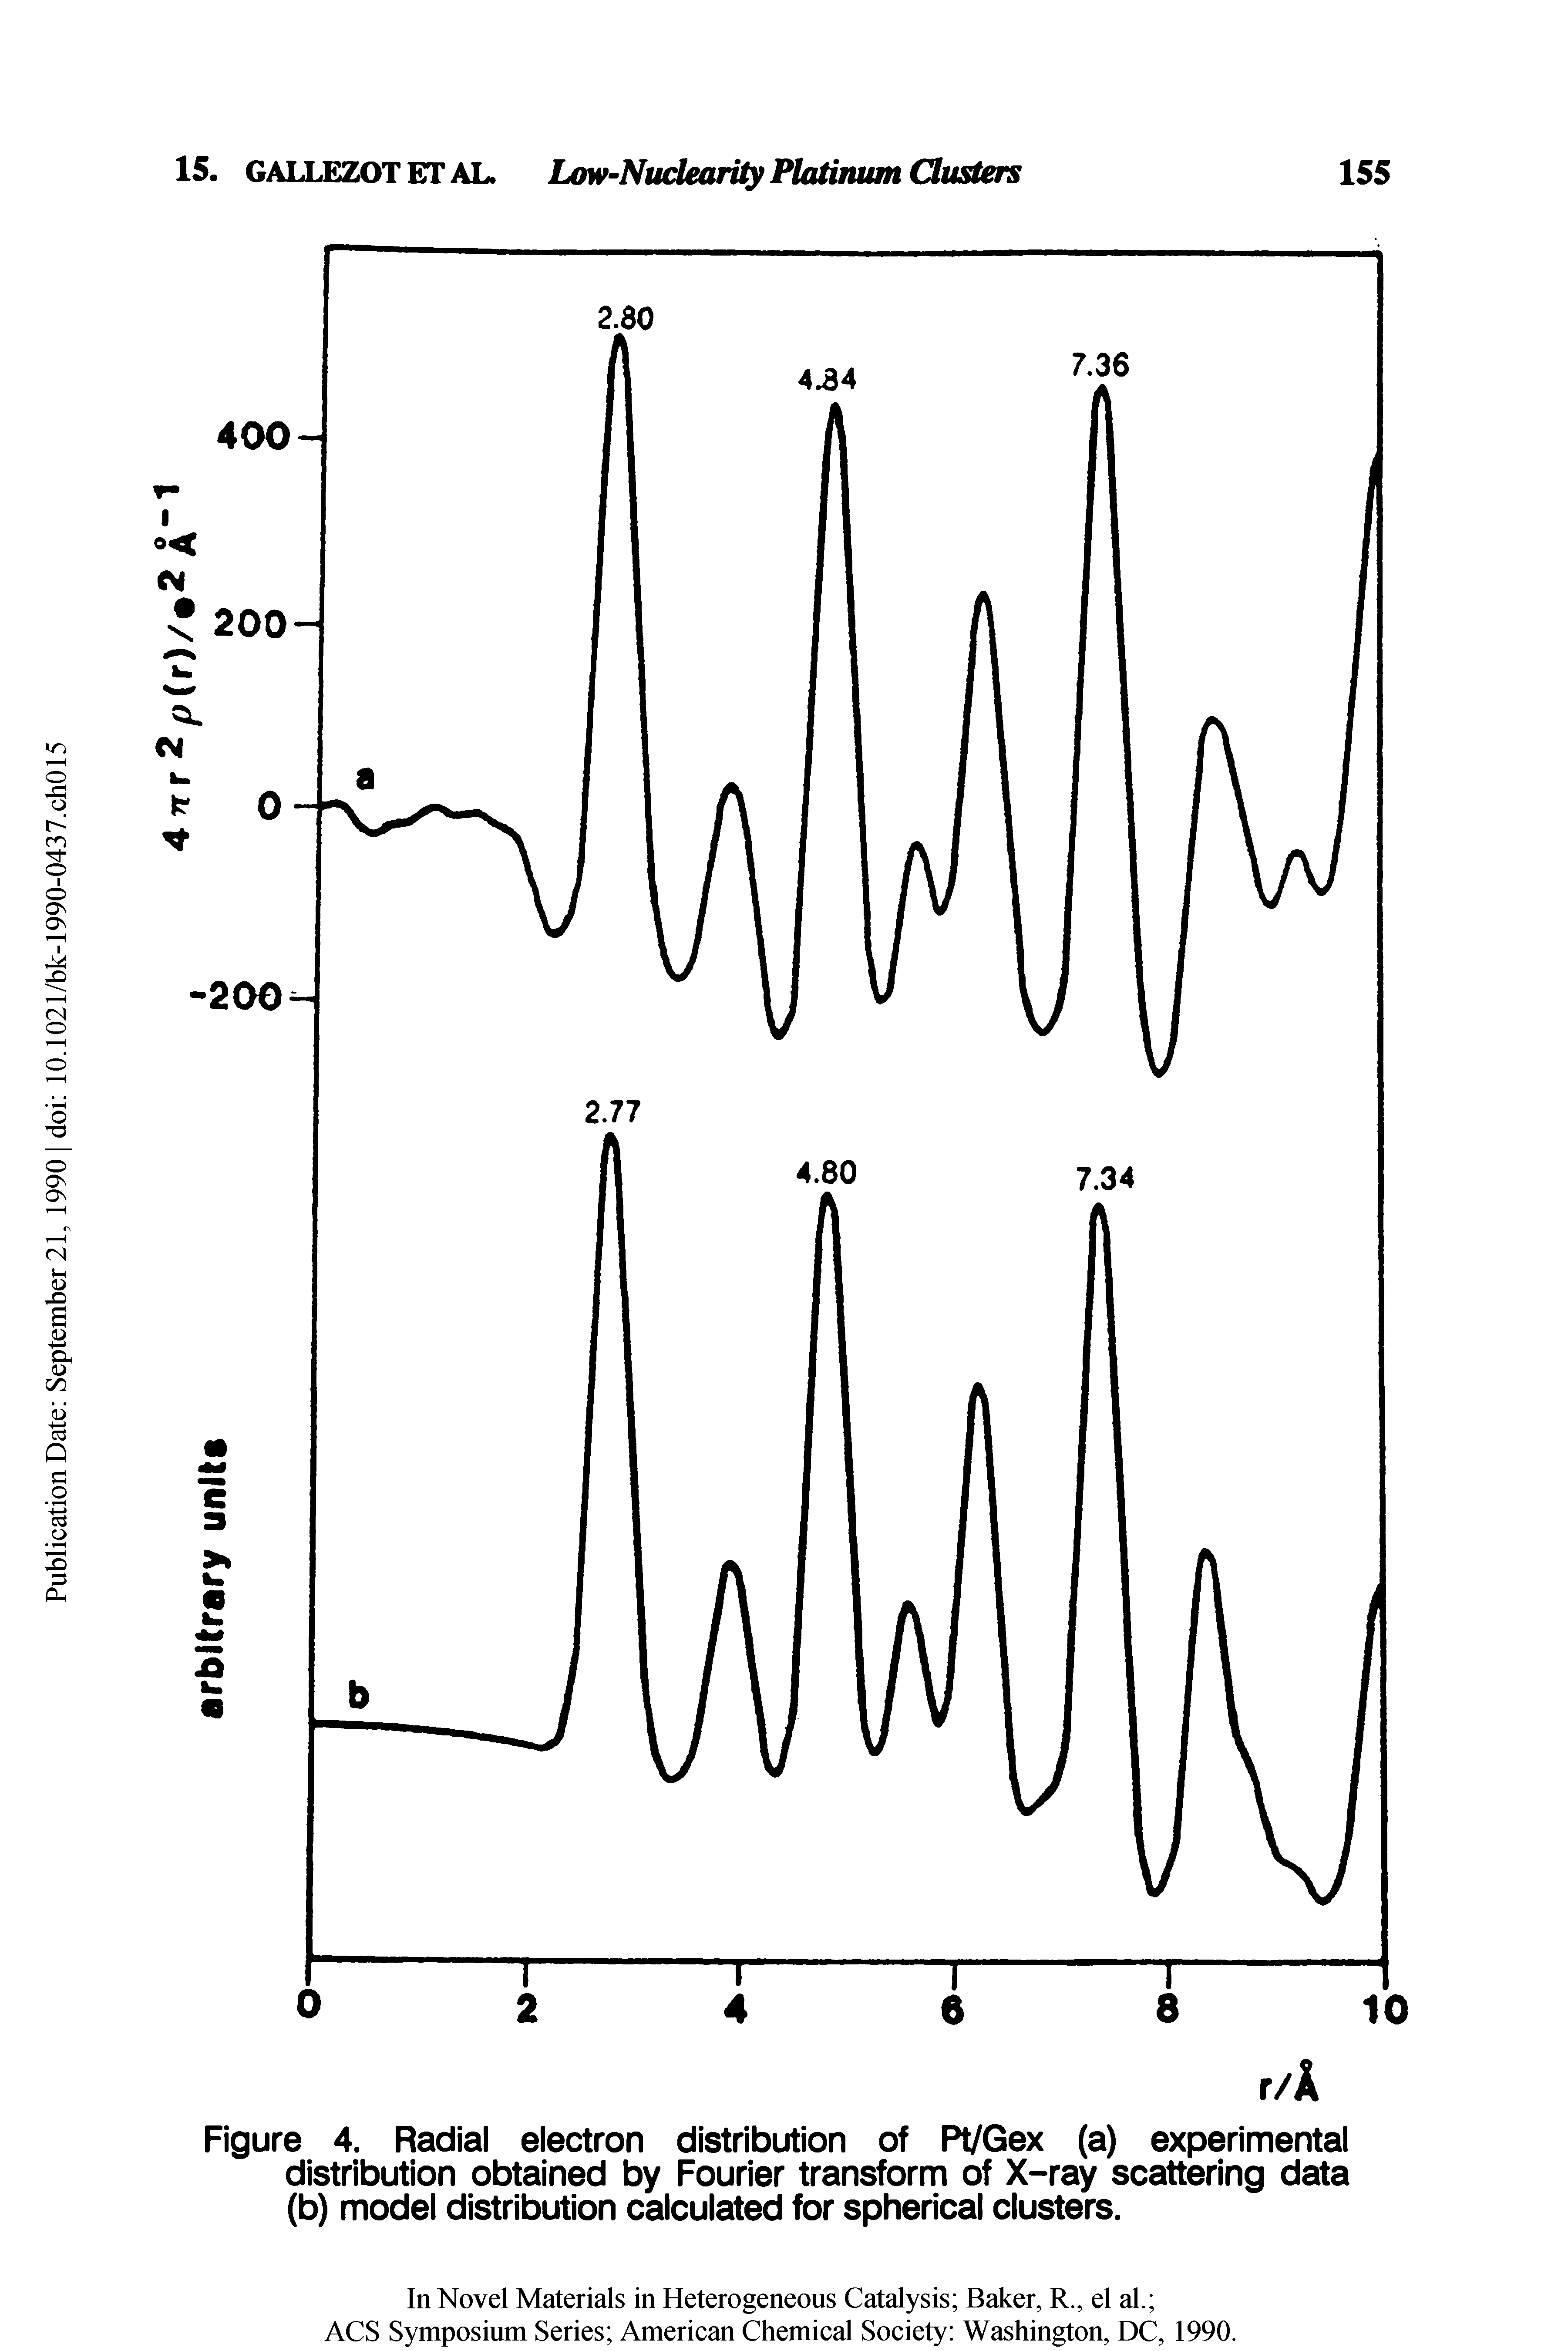 Figure 4. Radial electron distribution of Pt/Gex (a) experimental distribution obtained by Fourier transform of X-ray scattering data (b) model distribution calculated for spherical clusters.